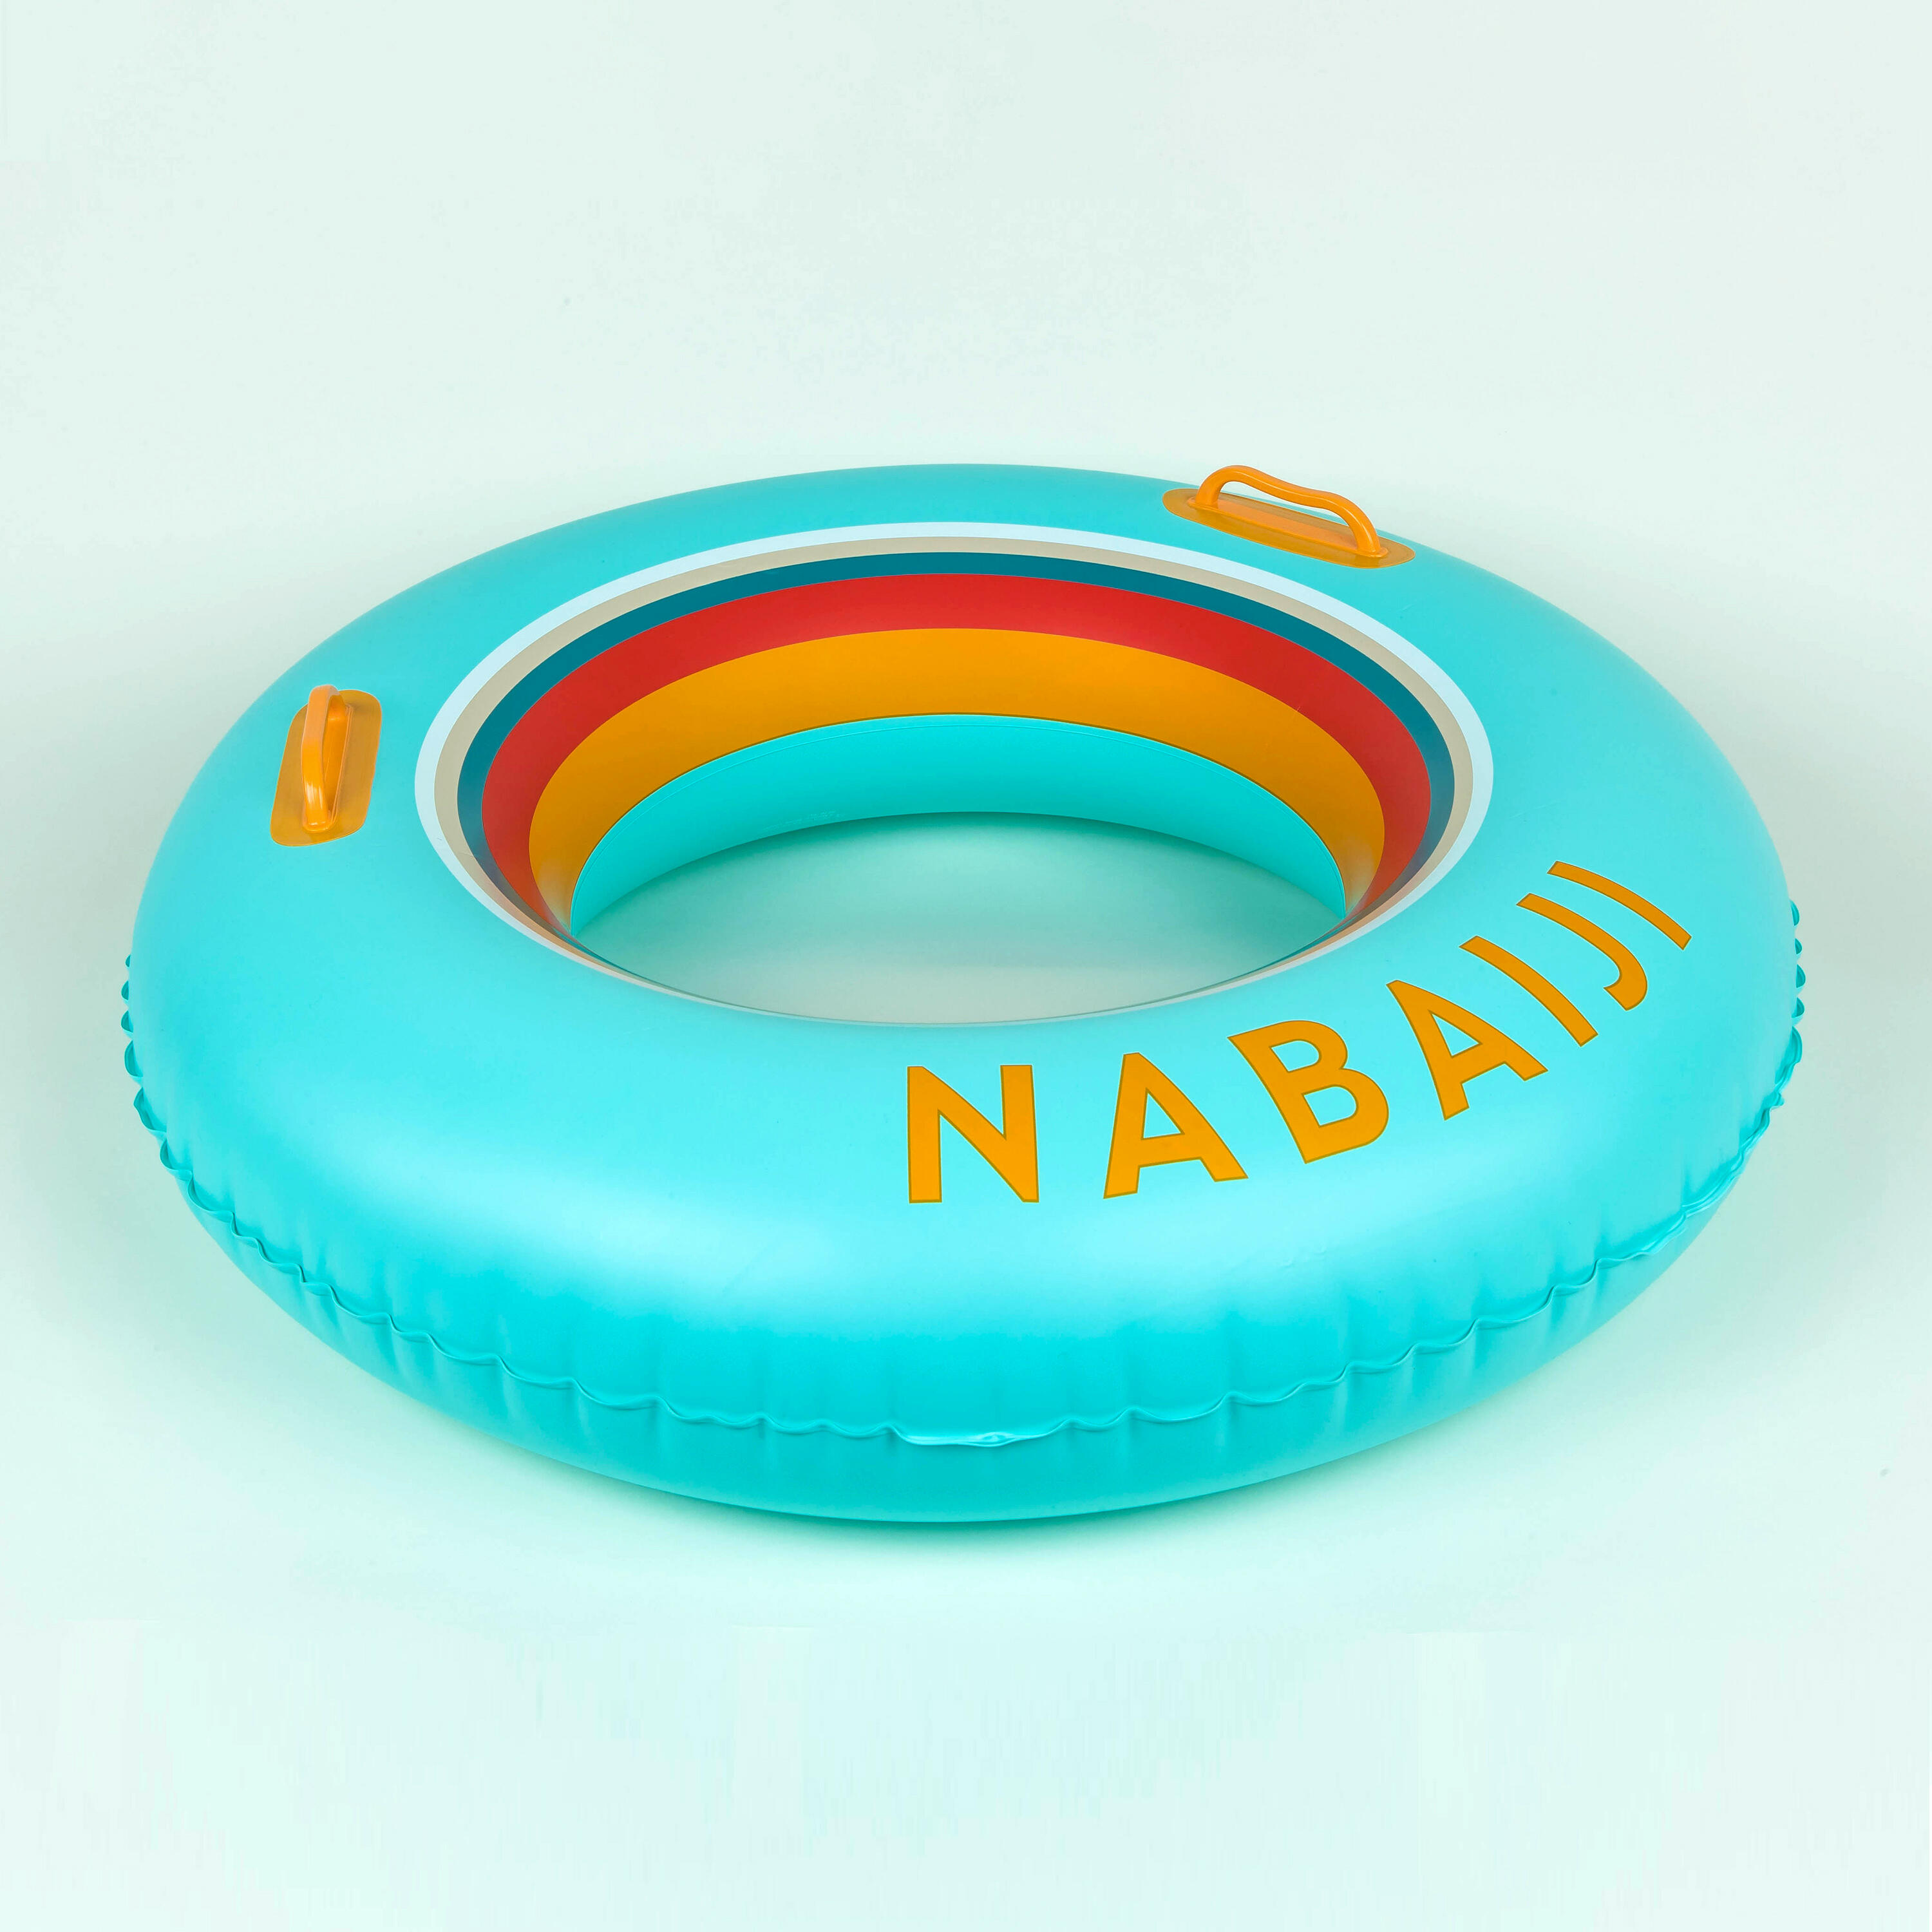 Large 92 cm inflatable printed pool ring with comfort grips - Turquoise ...